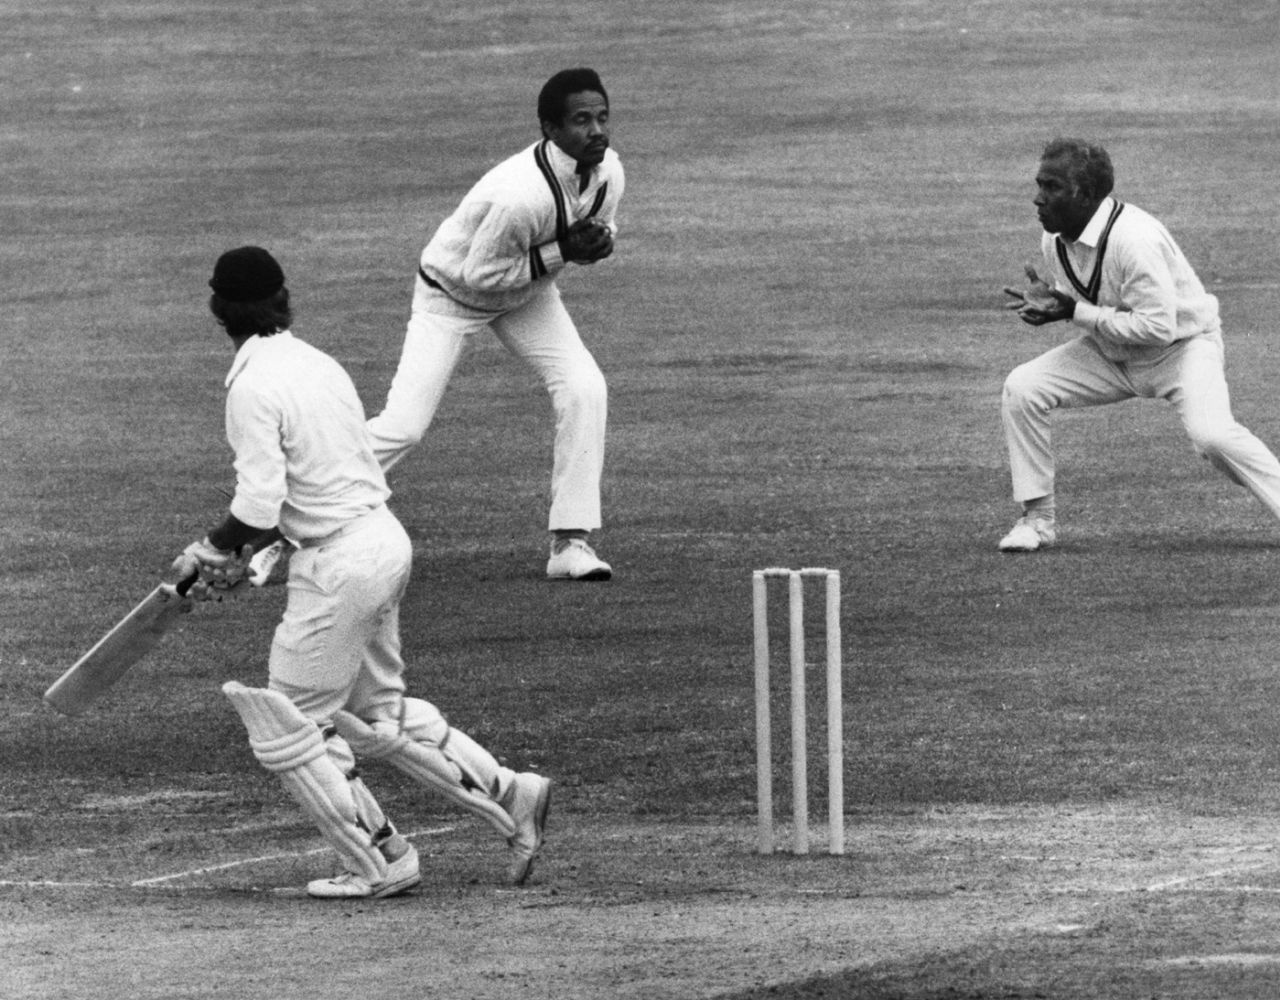 Garry Sobers takes a catch to dismiss Brian Luckhurst for 12 off Bernard Julien's bowling, England v West Indies, 3rd Test, Lord's, 4th day, August 27, 1973